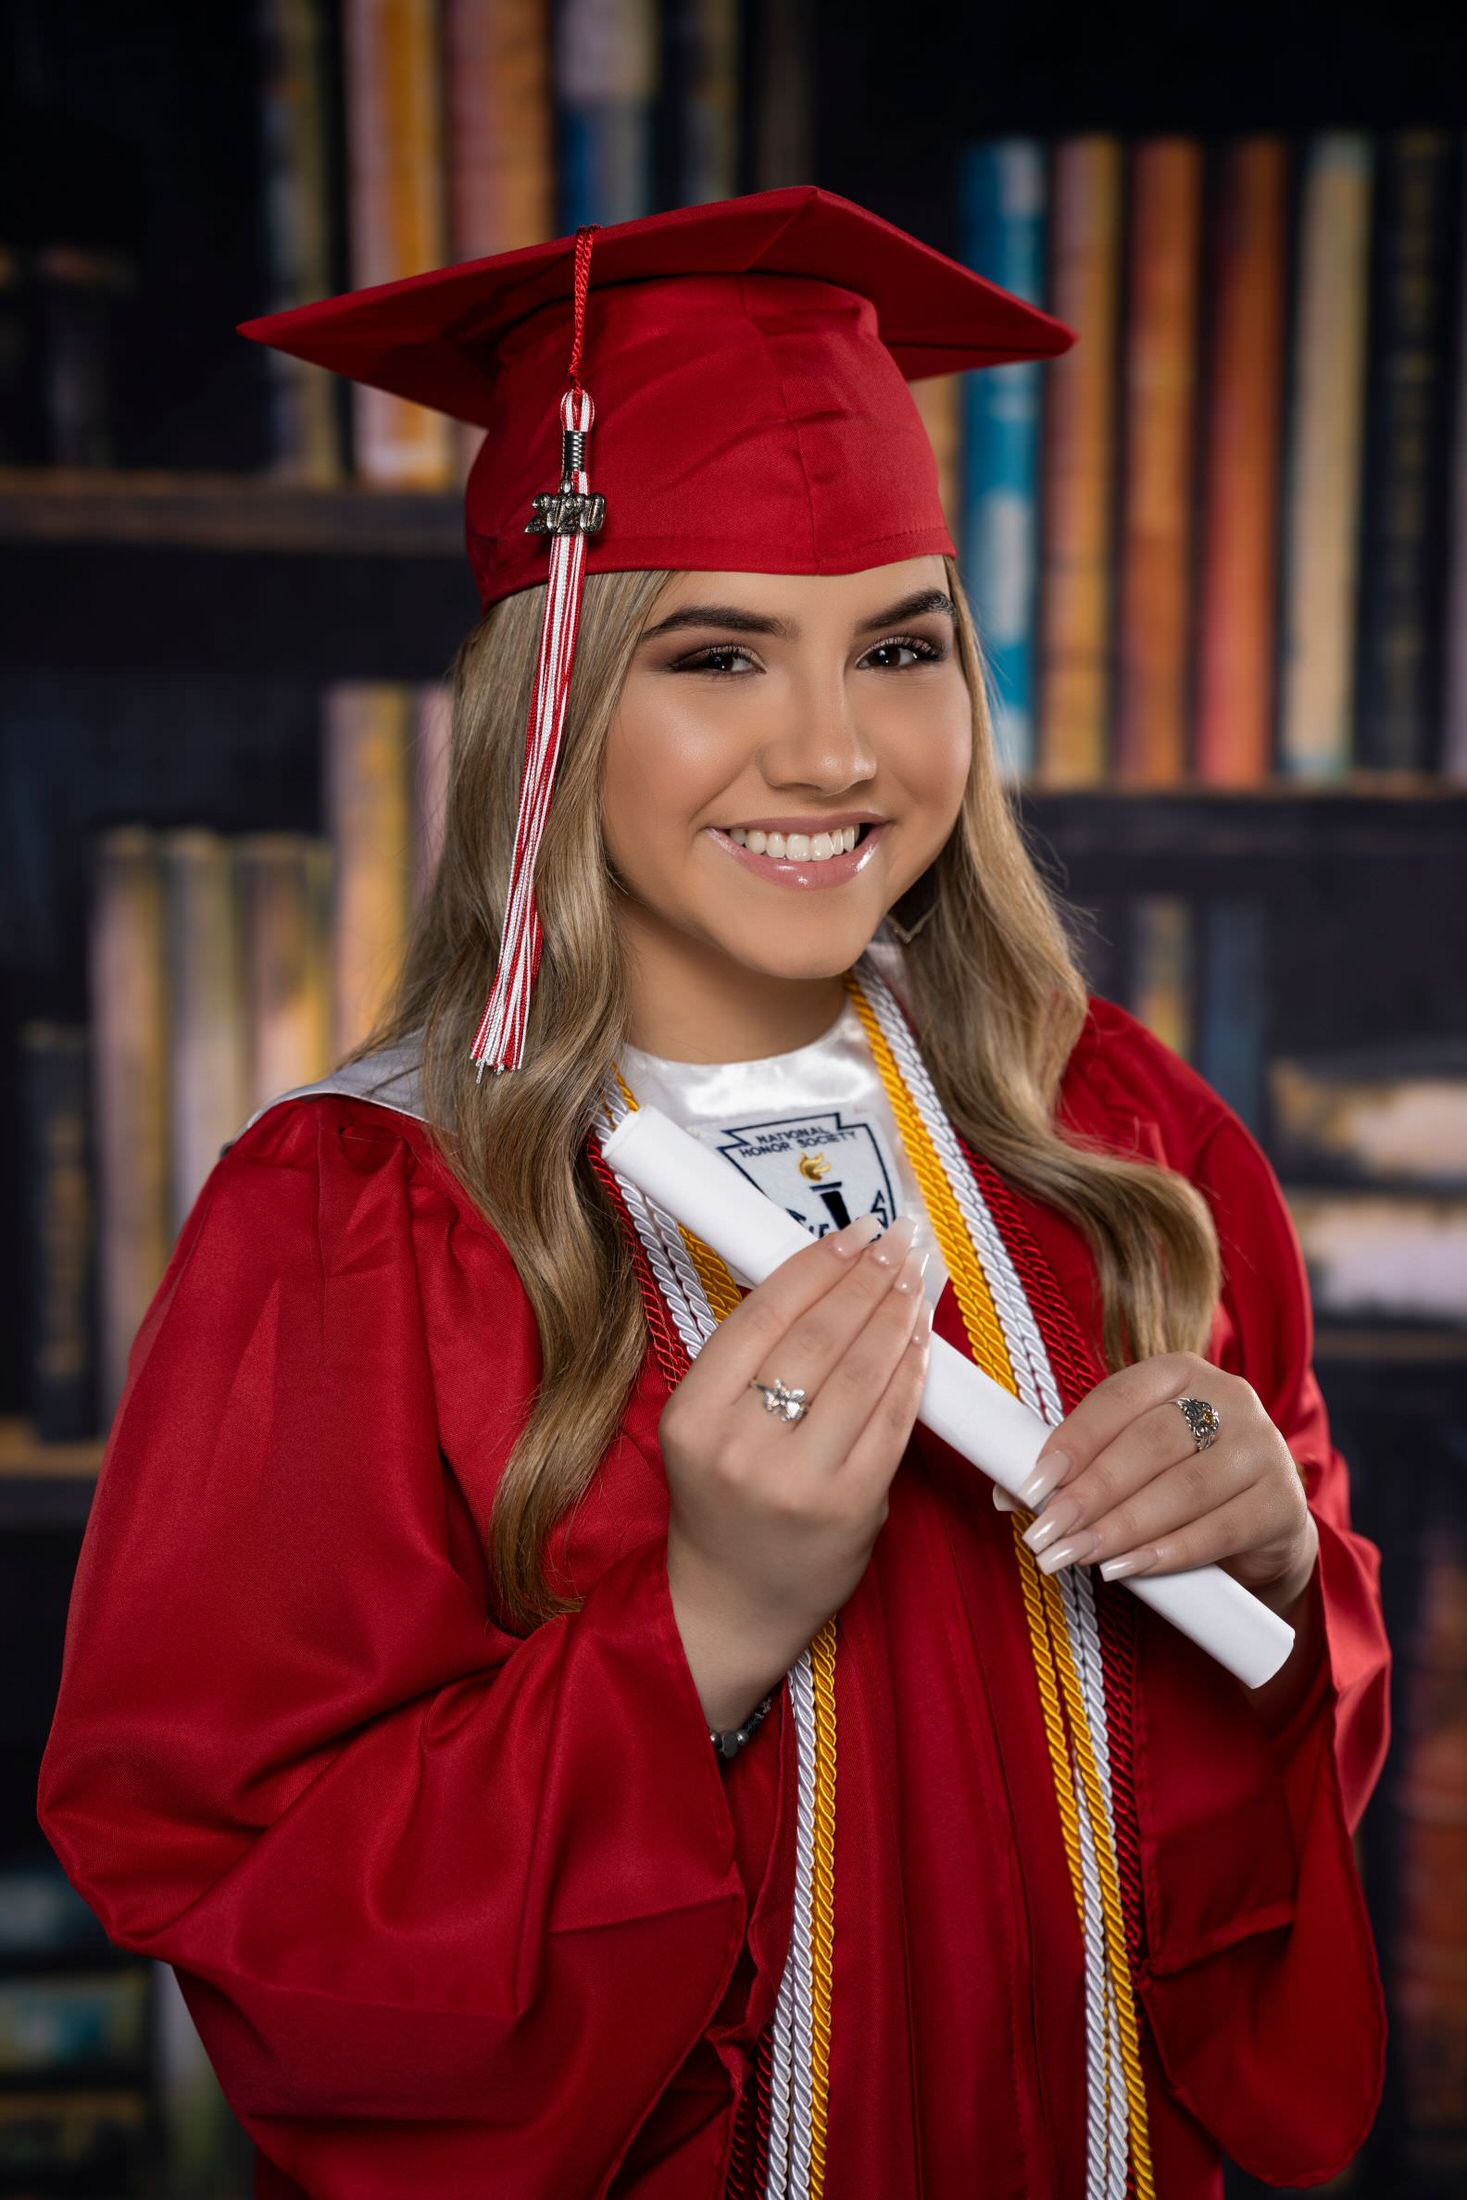 Tips For Better College Graduation Photos